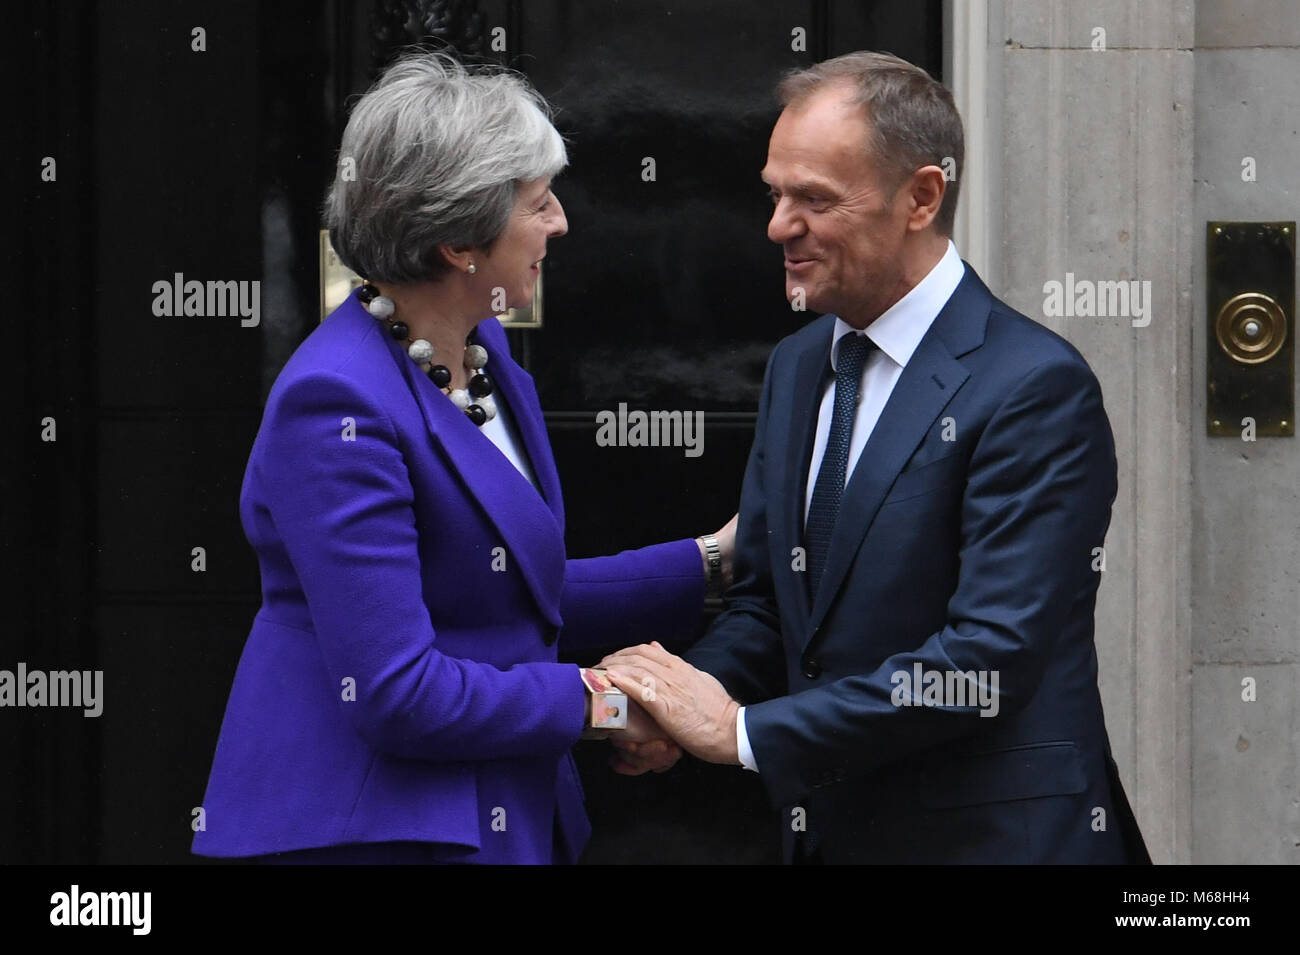 Prime Minister Theresa May greets European Council president Donald Tusk ahead of a meeting at Downing Street, London. Stock Photo